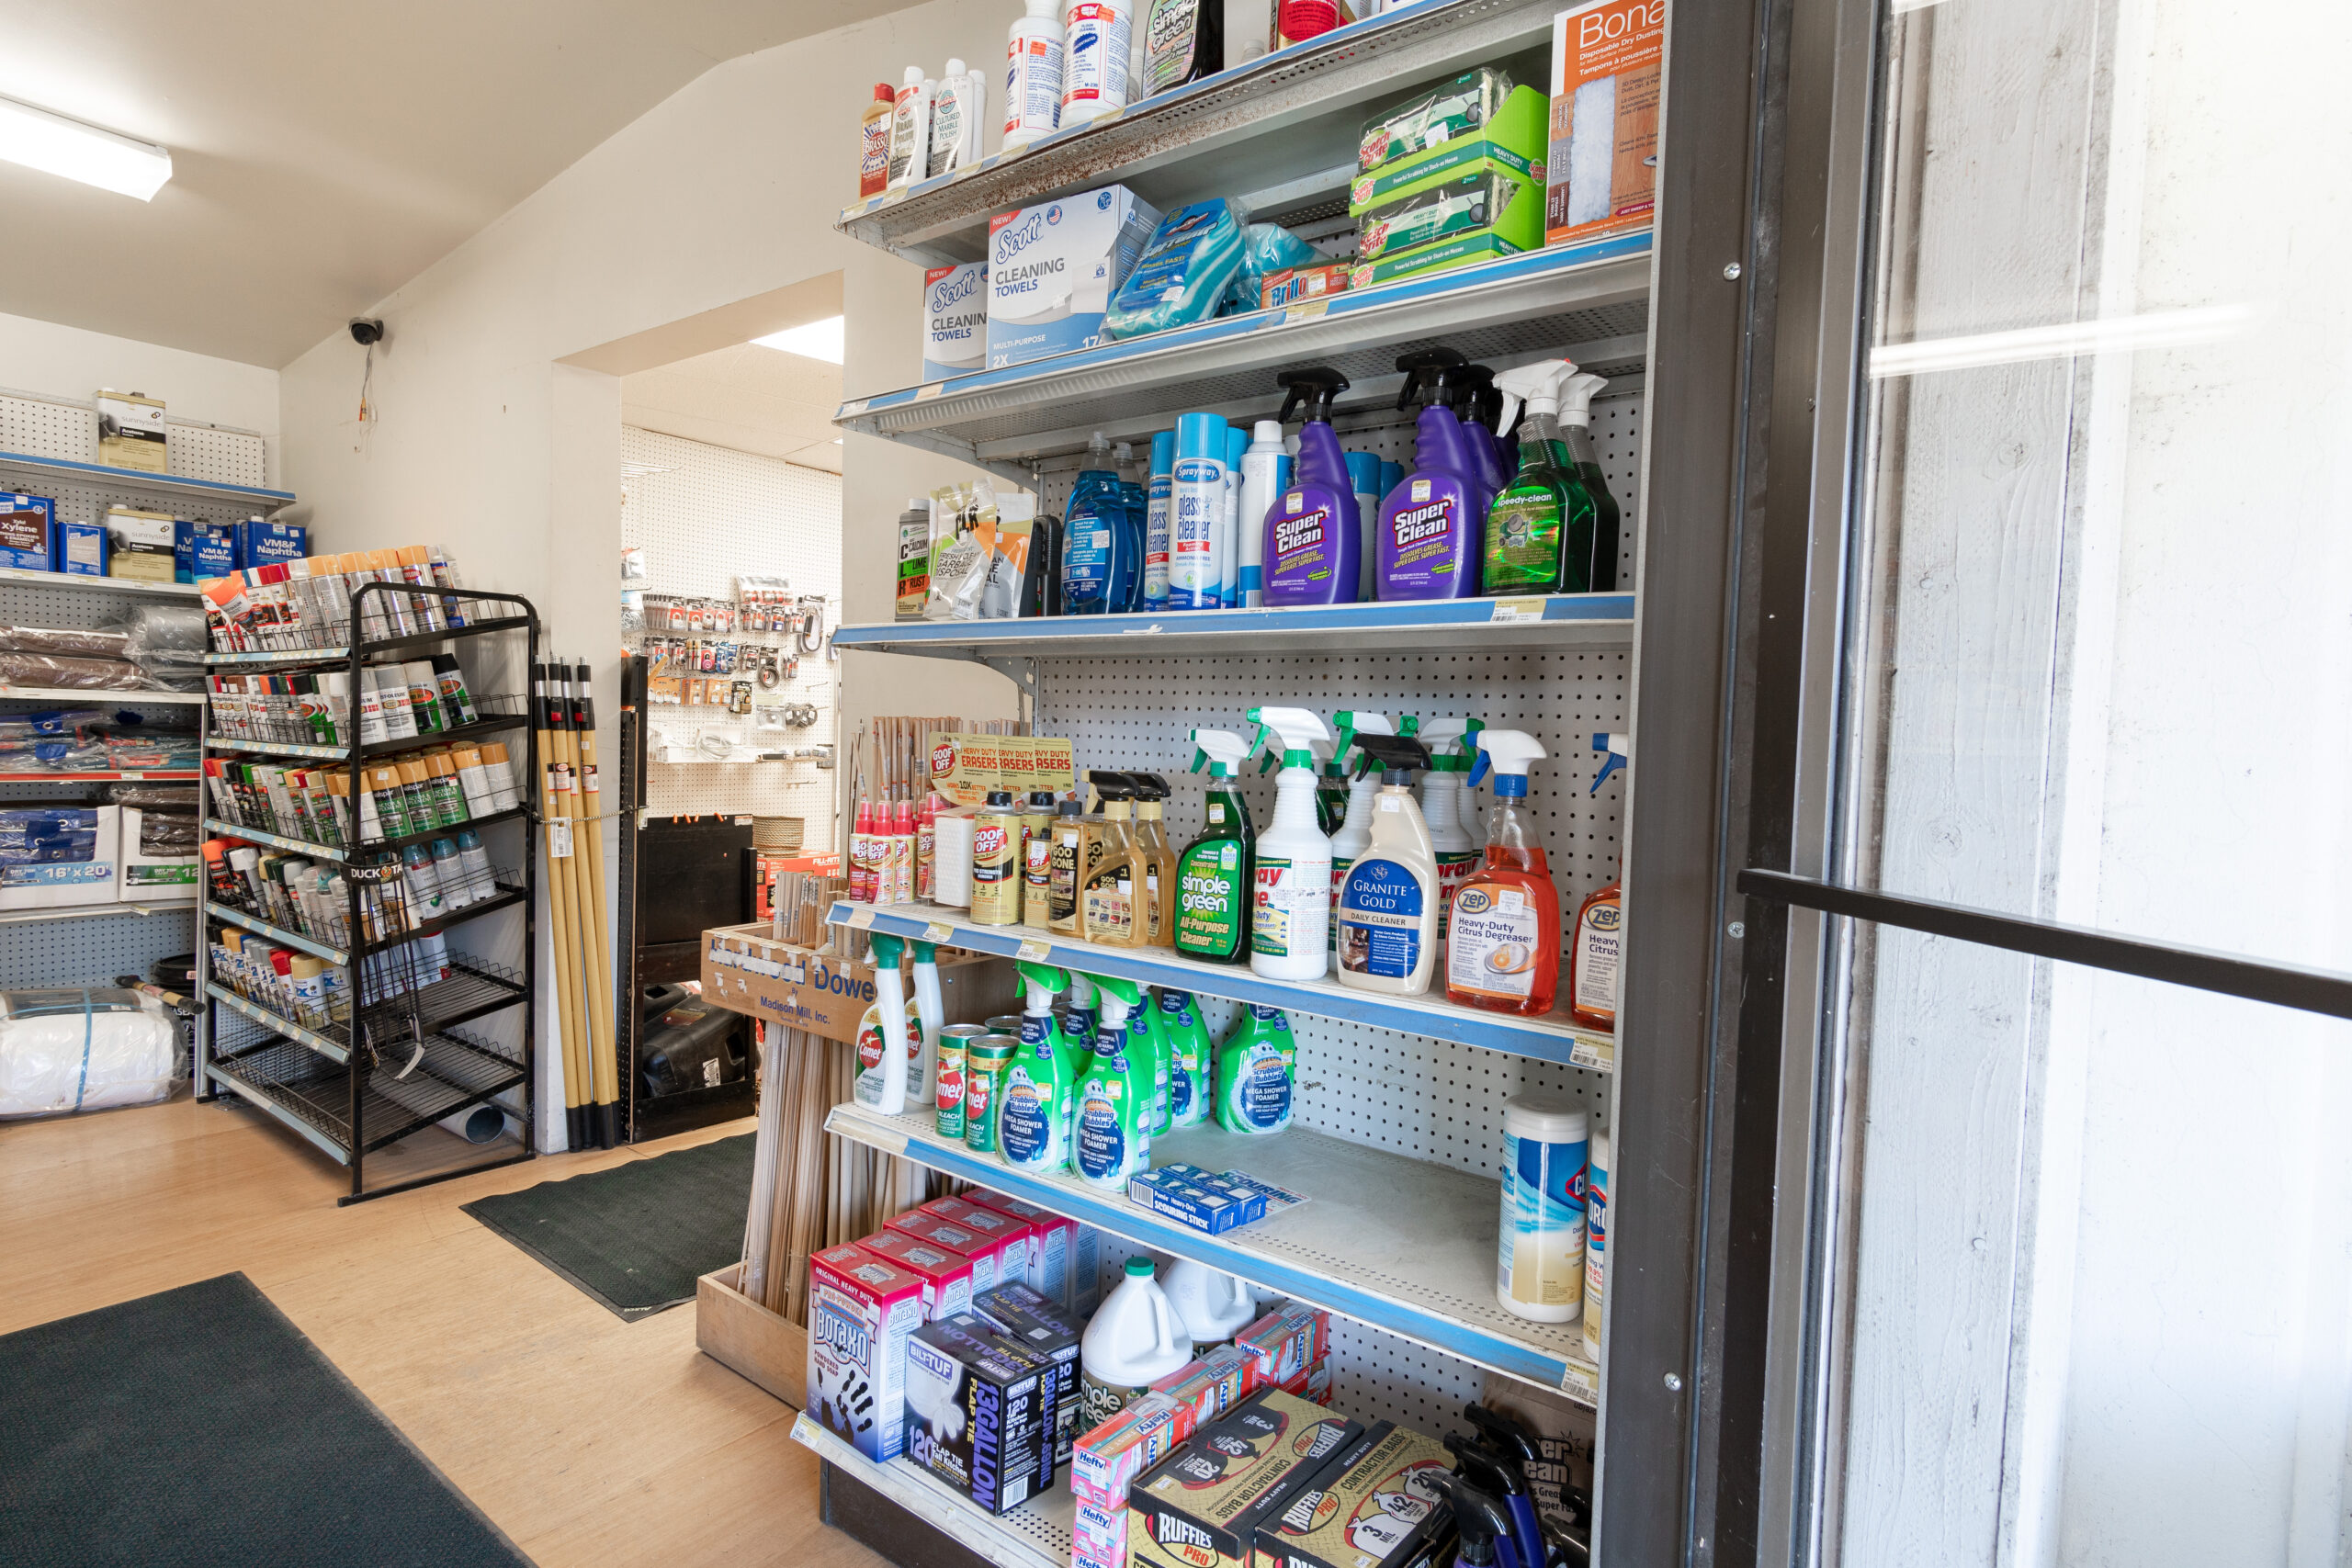 A shelf in Four Star Supply, full of cleaning supplies like glass cleaner, paper towels, trash bags, wet wipes, & other products.